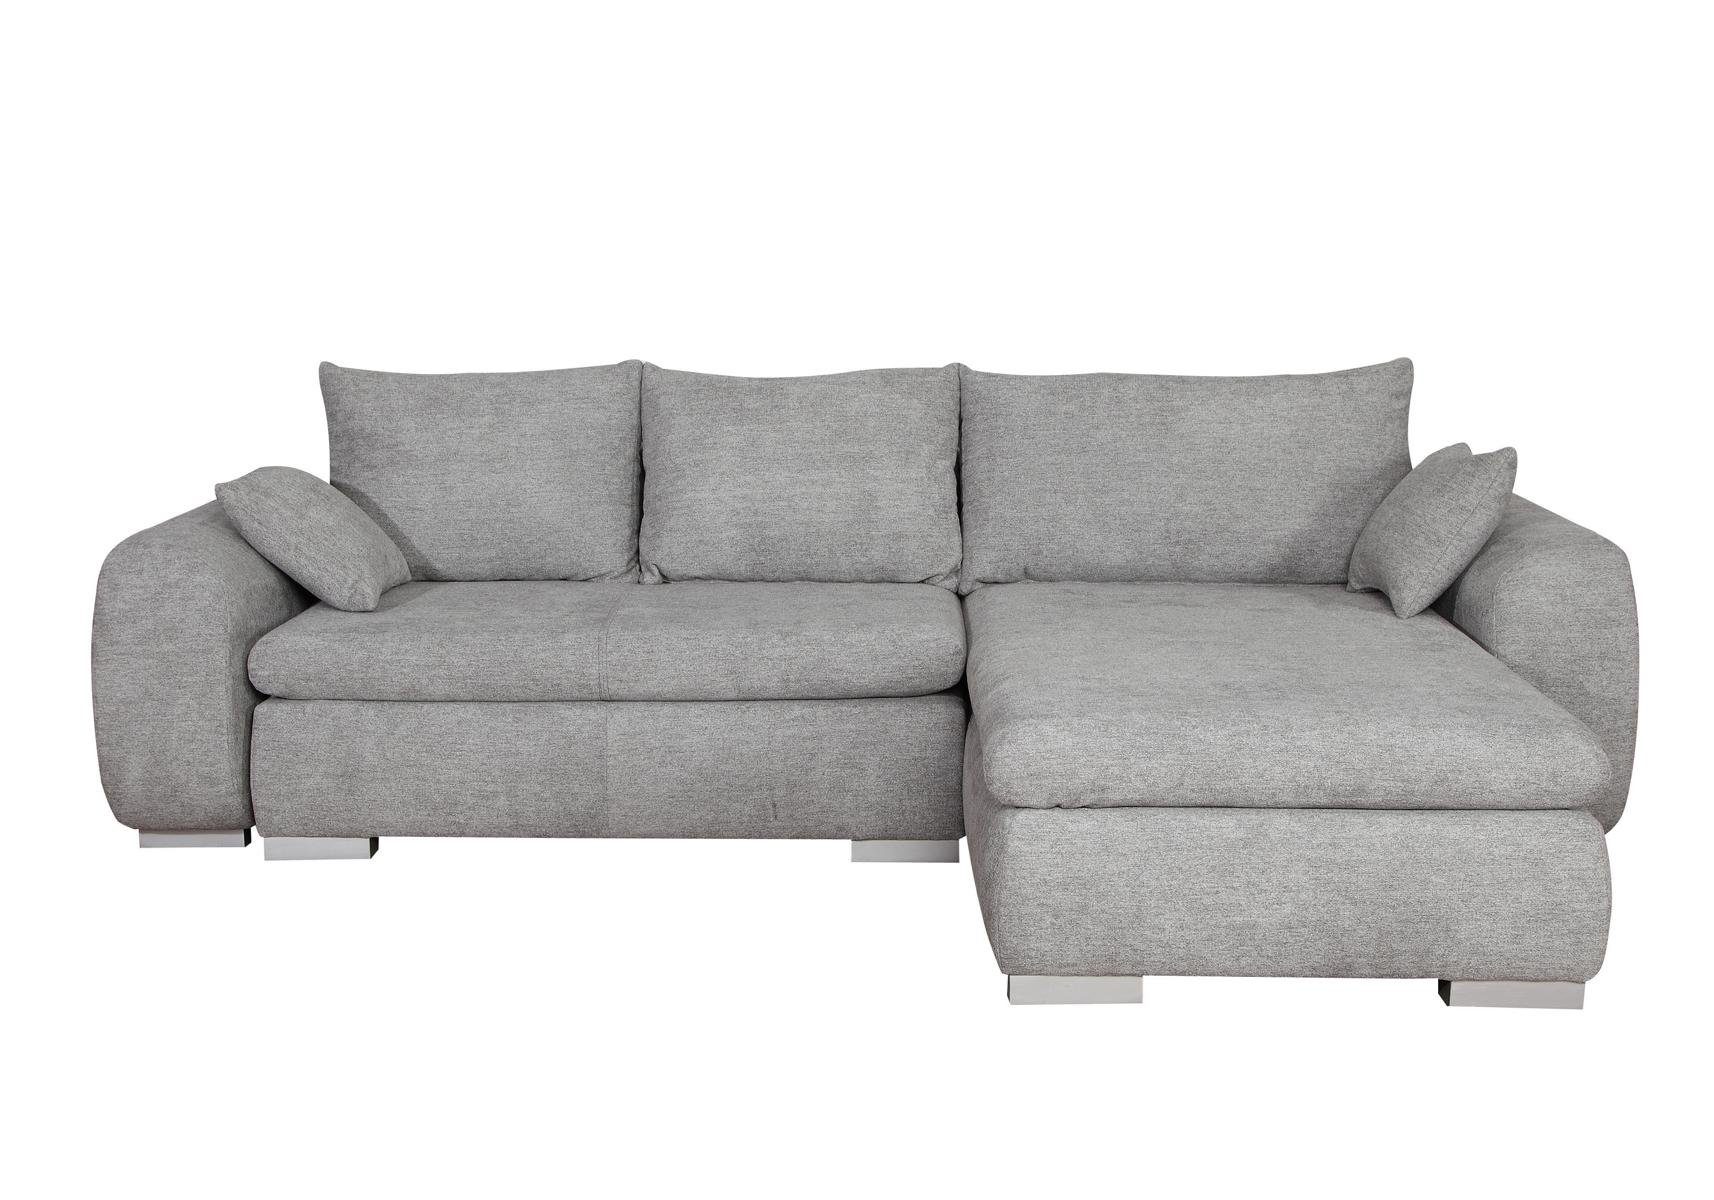 JVmoebel Sofa Stoffsofa Sofa Couch Polster L Form Wohnlandschaft, Made in Europe